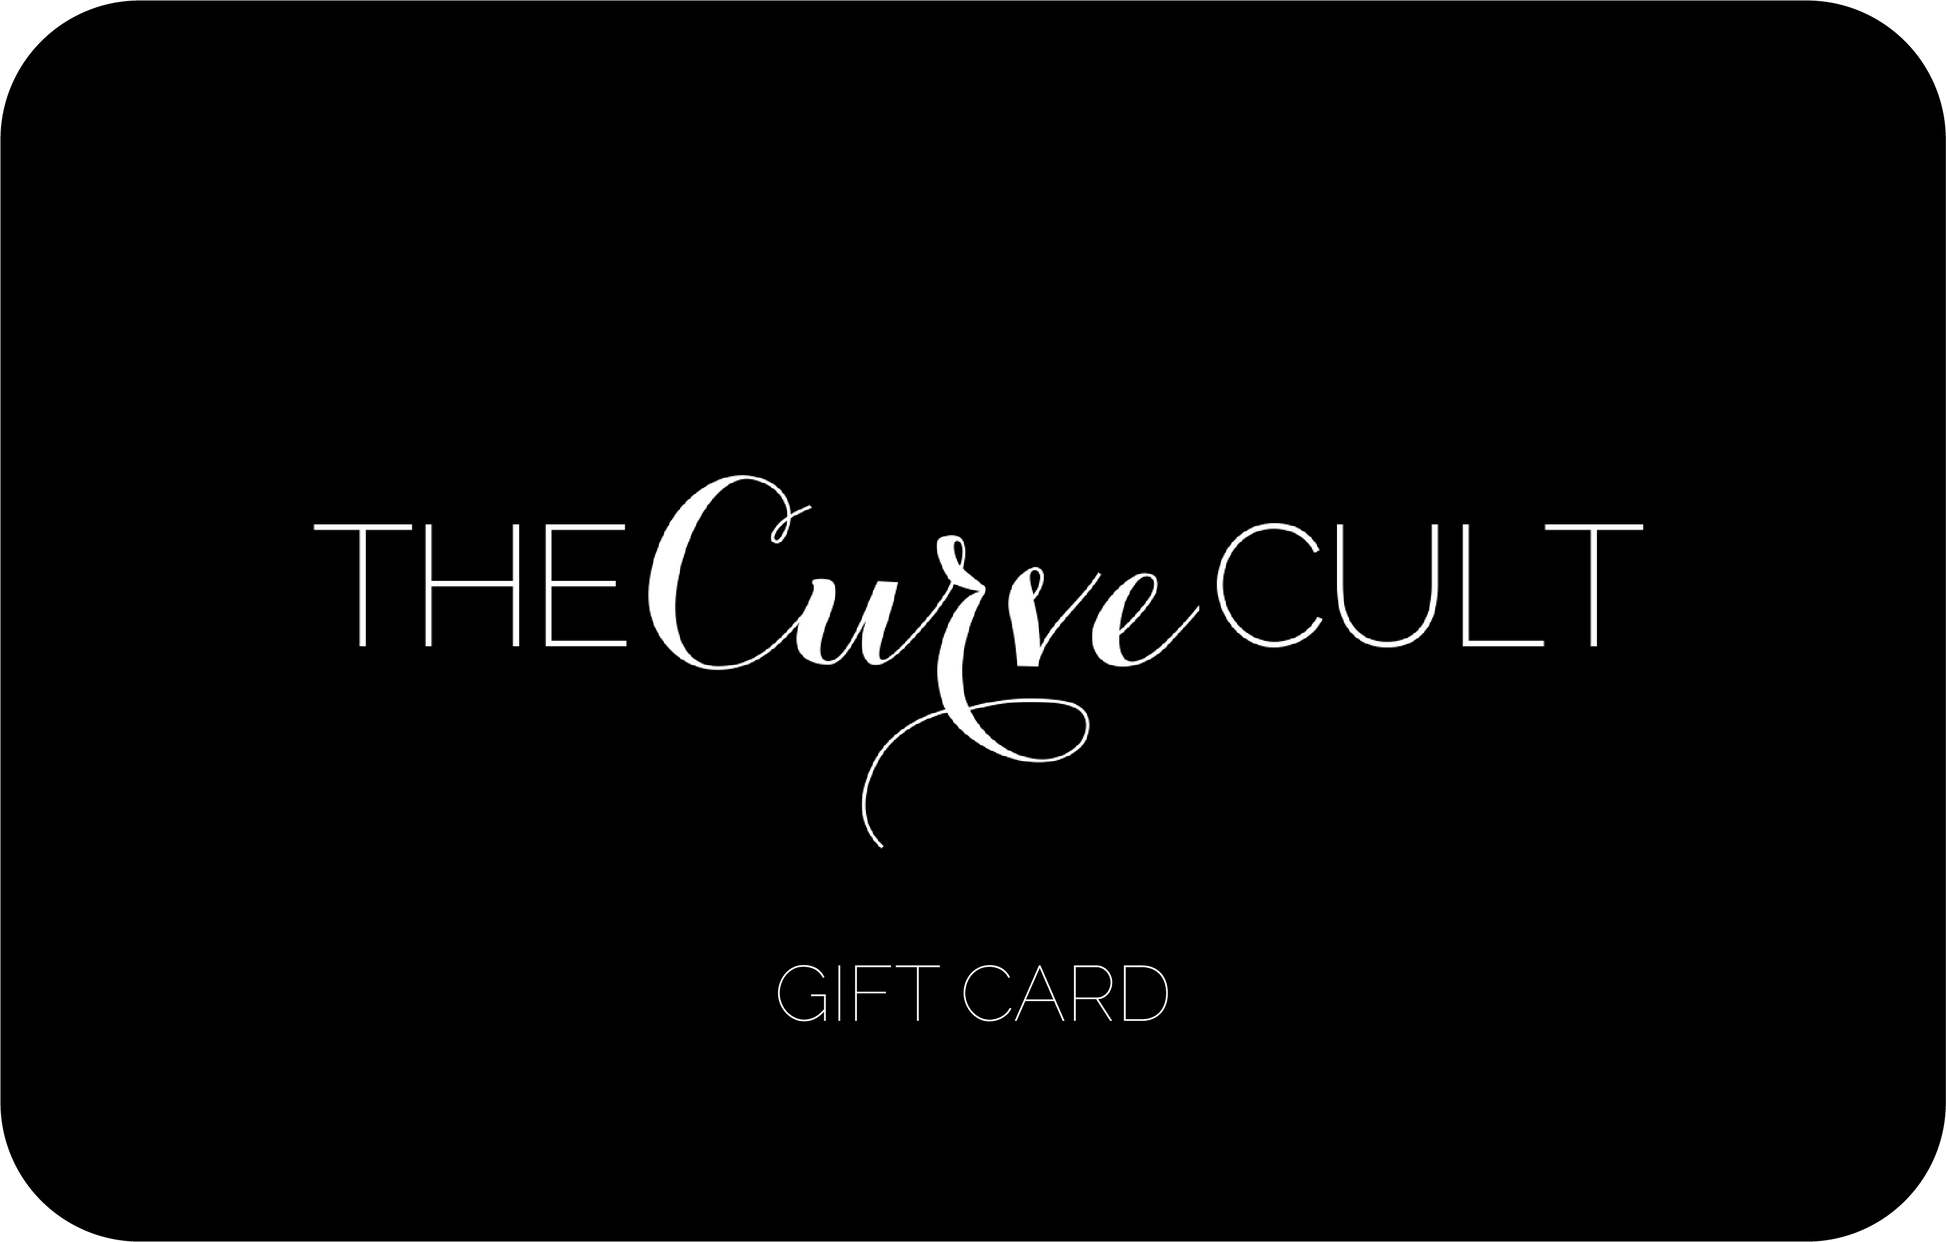 Gift Card - THE CURVE CULT